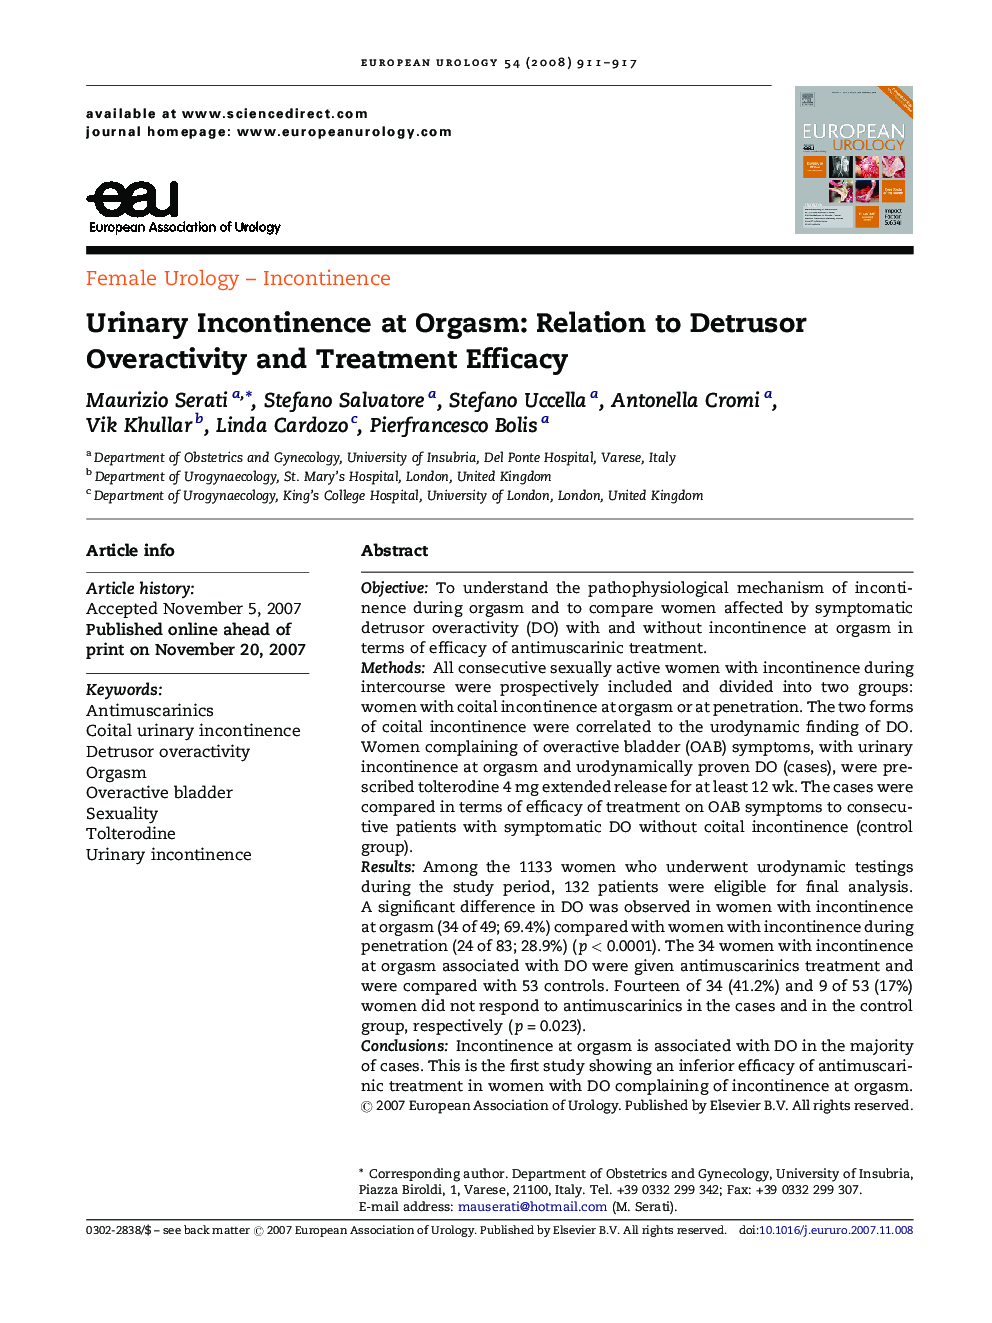 Urinary Incontinence at Orgasm: Relation to Detrusor Overactivity and Treatment Efficacy